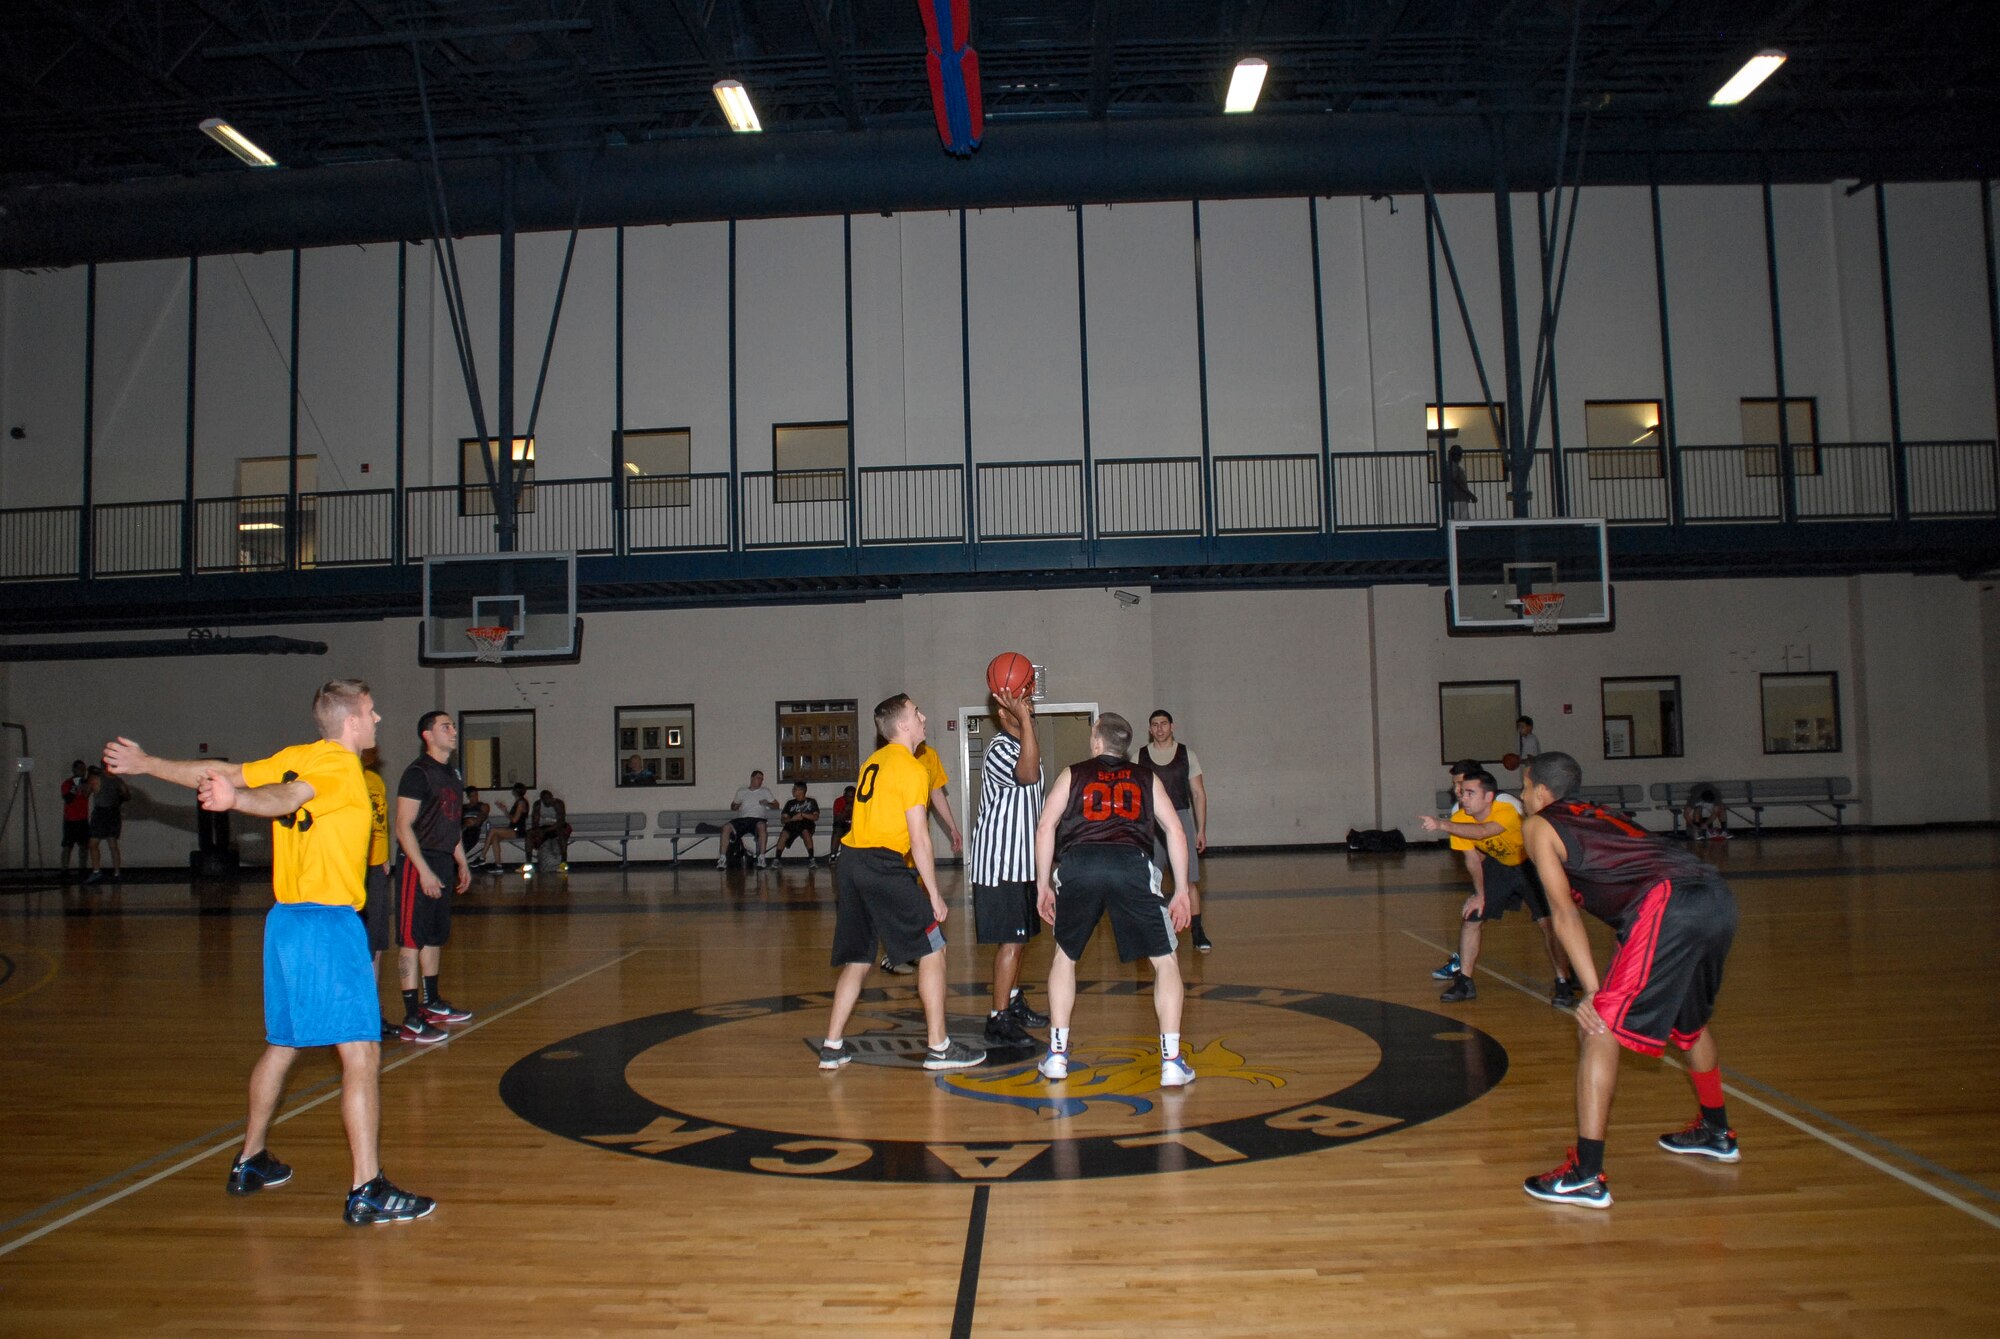 The 53rd Airlift Squadron and the 19th Operations Support Squadron prepare to tipoff for an intramural basketball game Feb. 11, 2013, at Little Rock Air Force Base, Ark. Base intramural games are held Monday – Thursday after duty hours. (U.S. Air Force photo by Staff Sgt. Jacob Barreiro)  